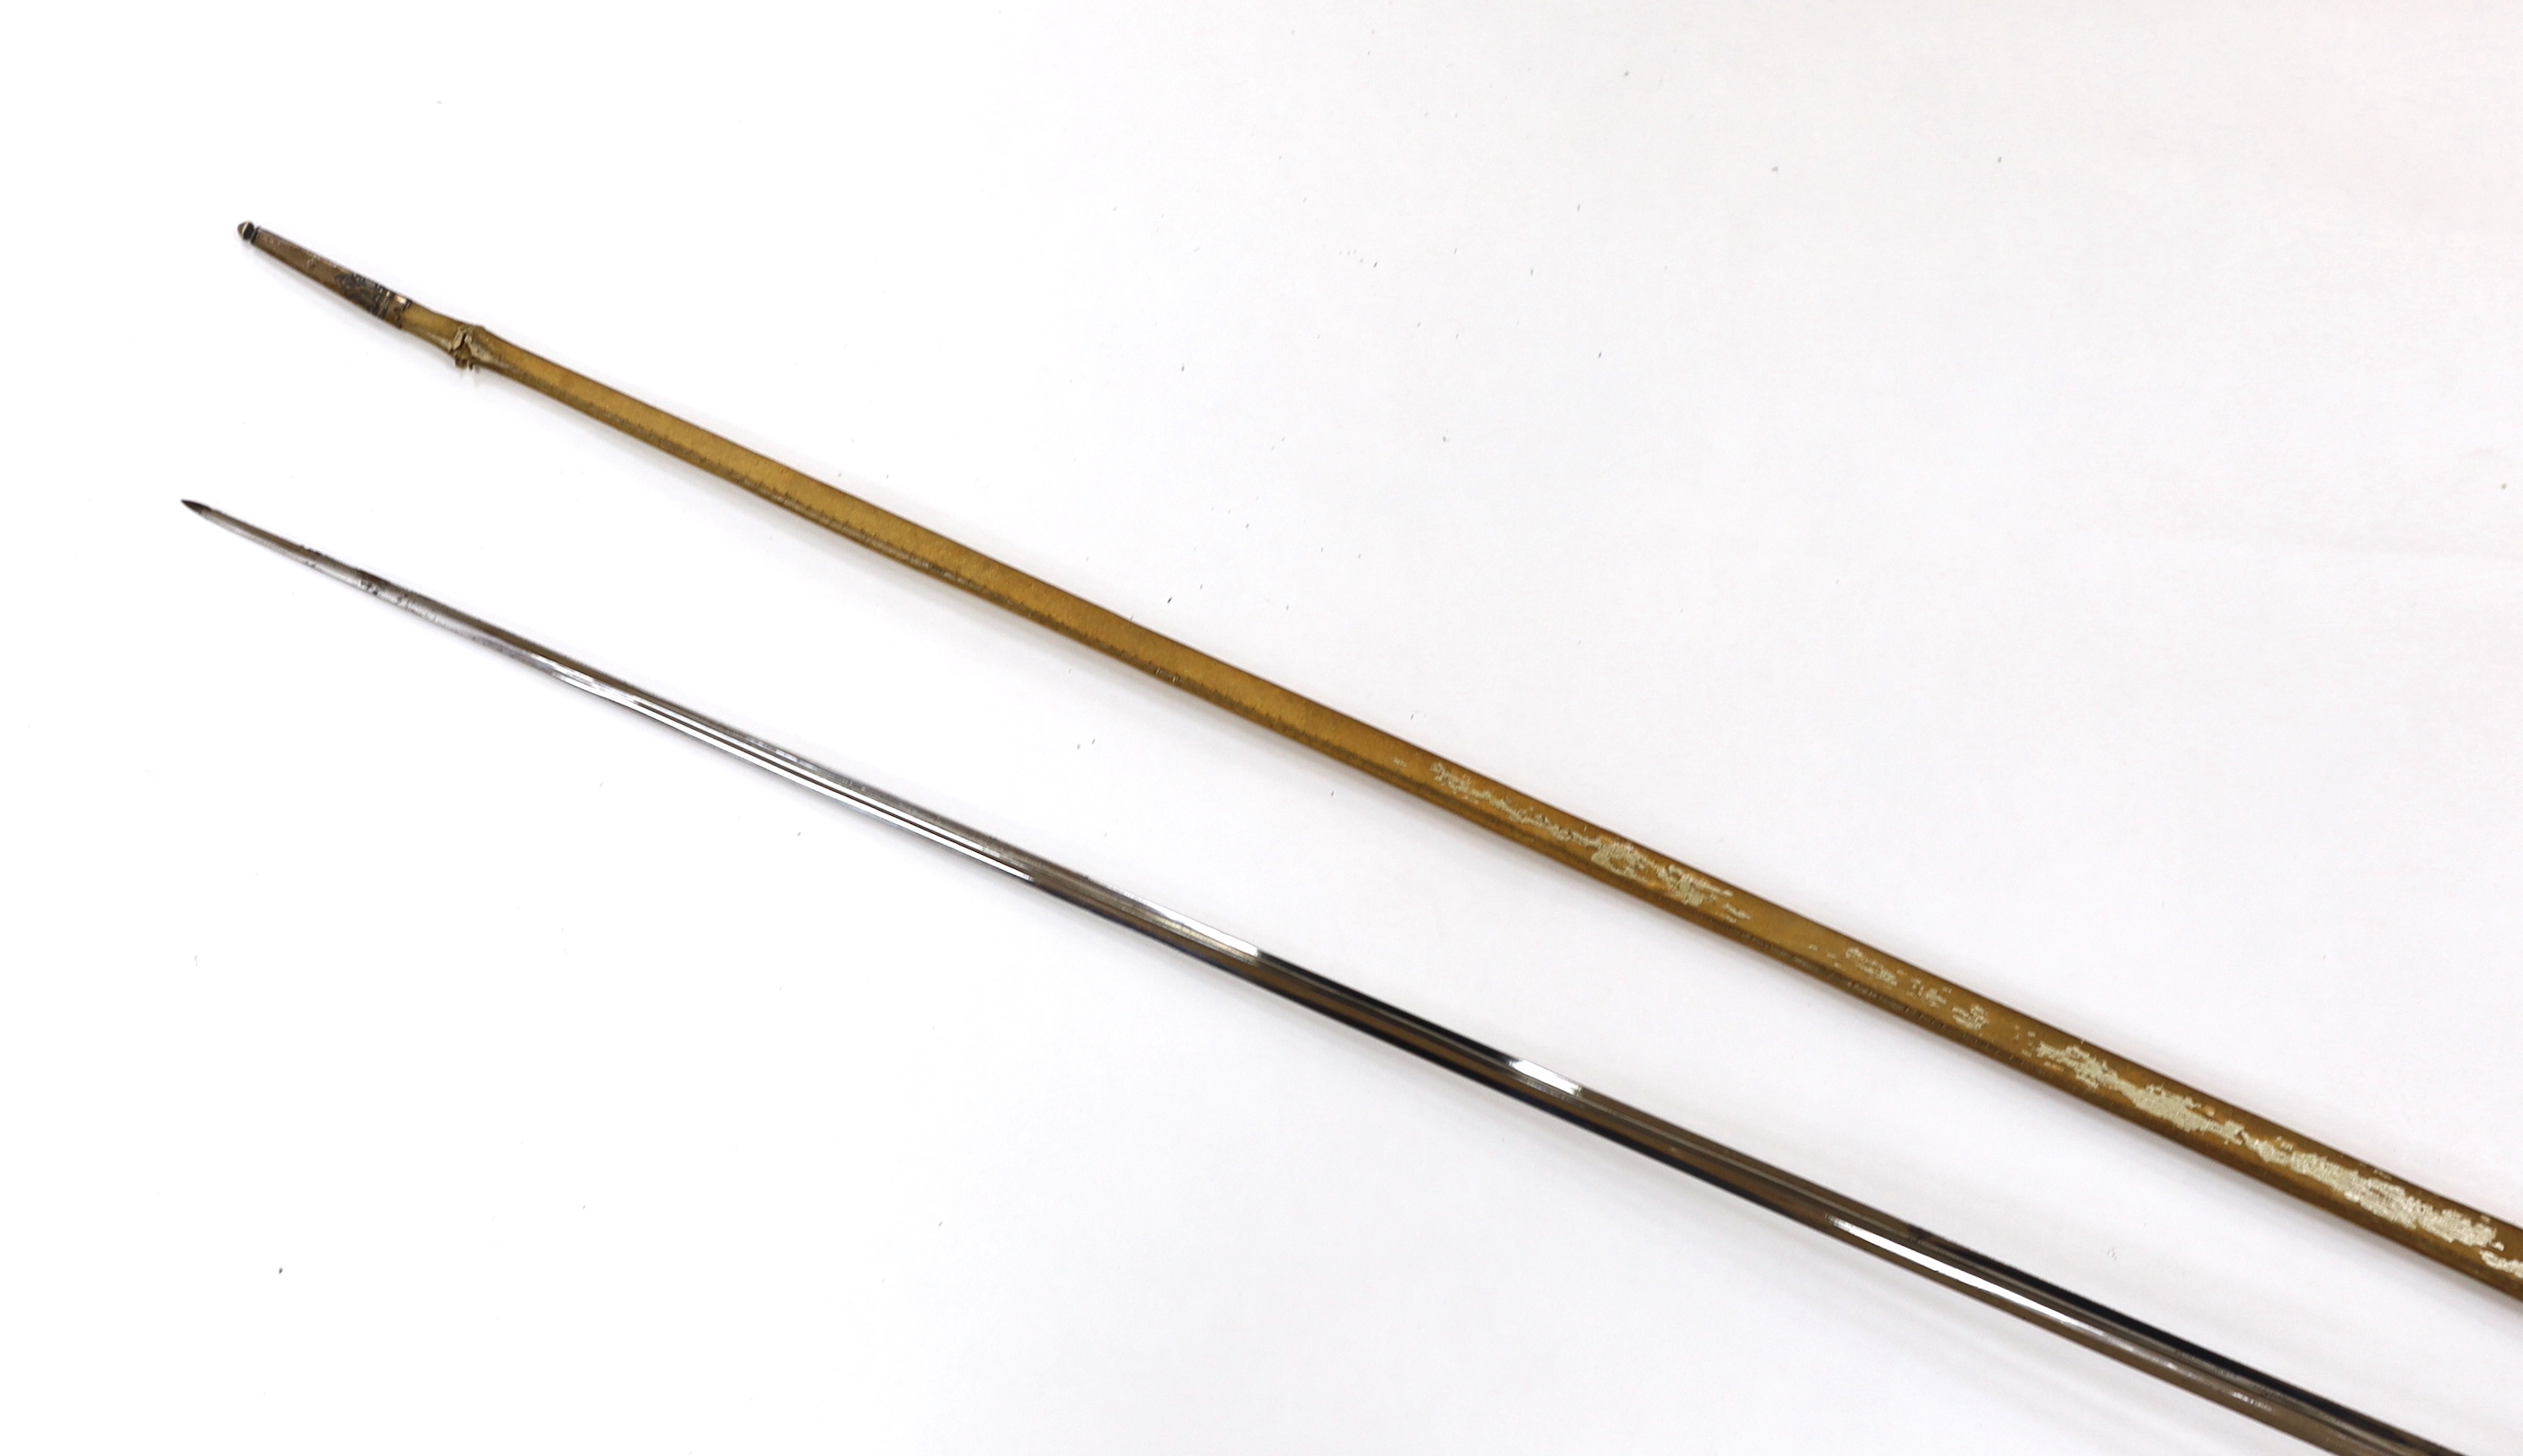 An English small sword, c.1775, pierced with facetted stud work, silver tape and wire bound grip, triangular section etched blade, in its original vellum scabbard and silver mounts, top mount engraved Dieltry Royal Excha